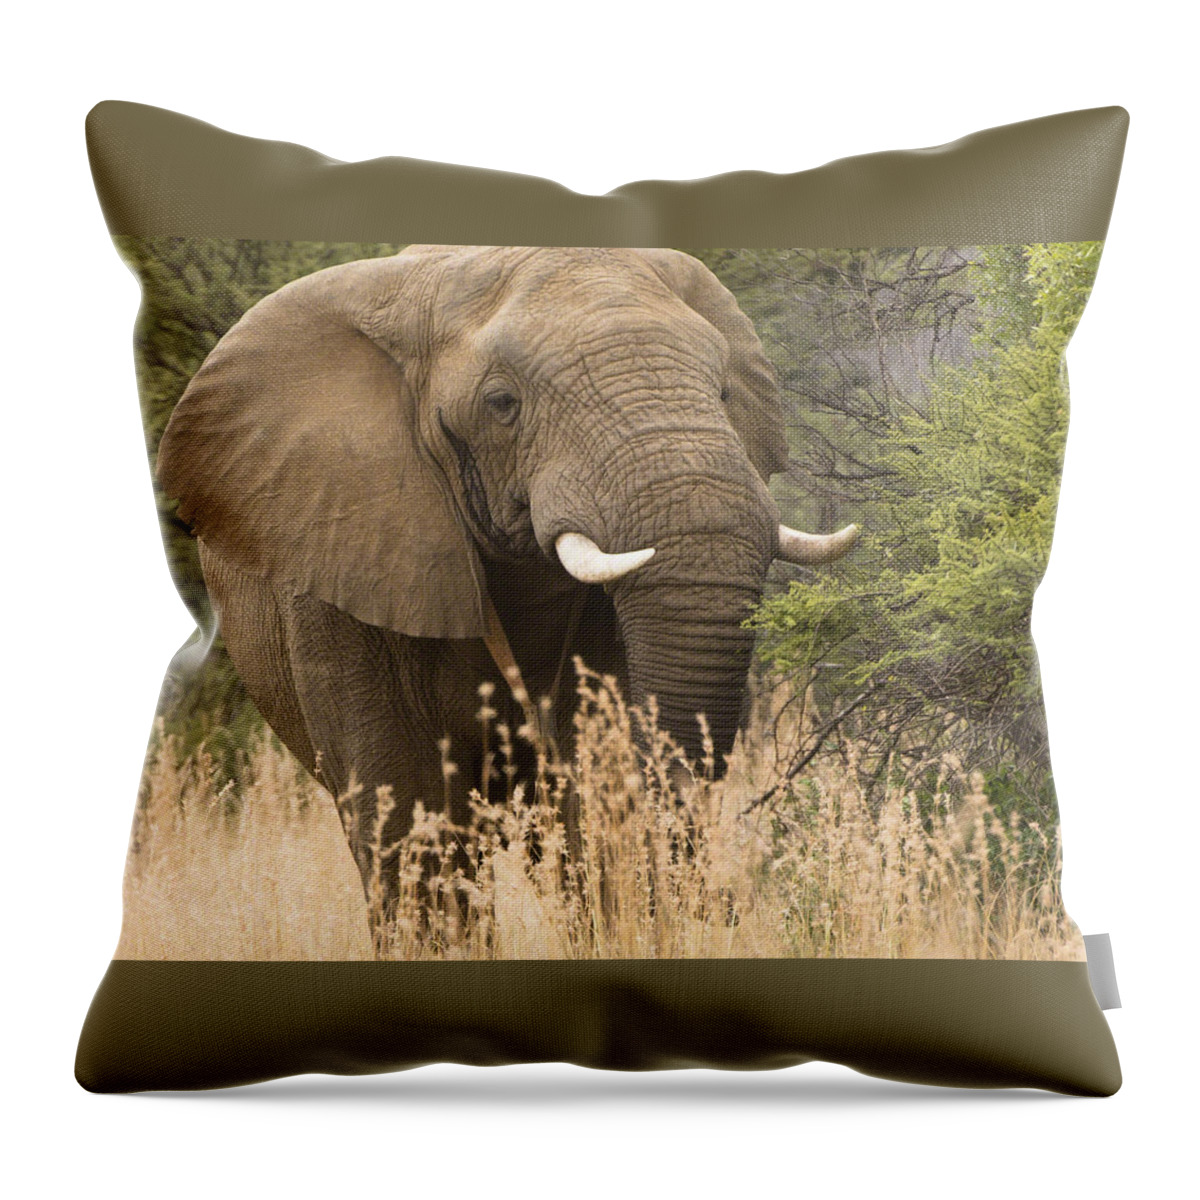 Wildlife Throw Pillow featuring the photograph Jumbo by Patrick Kain